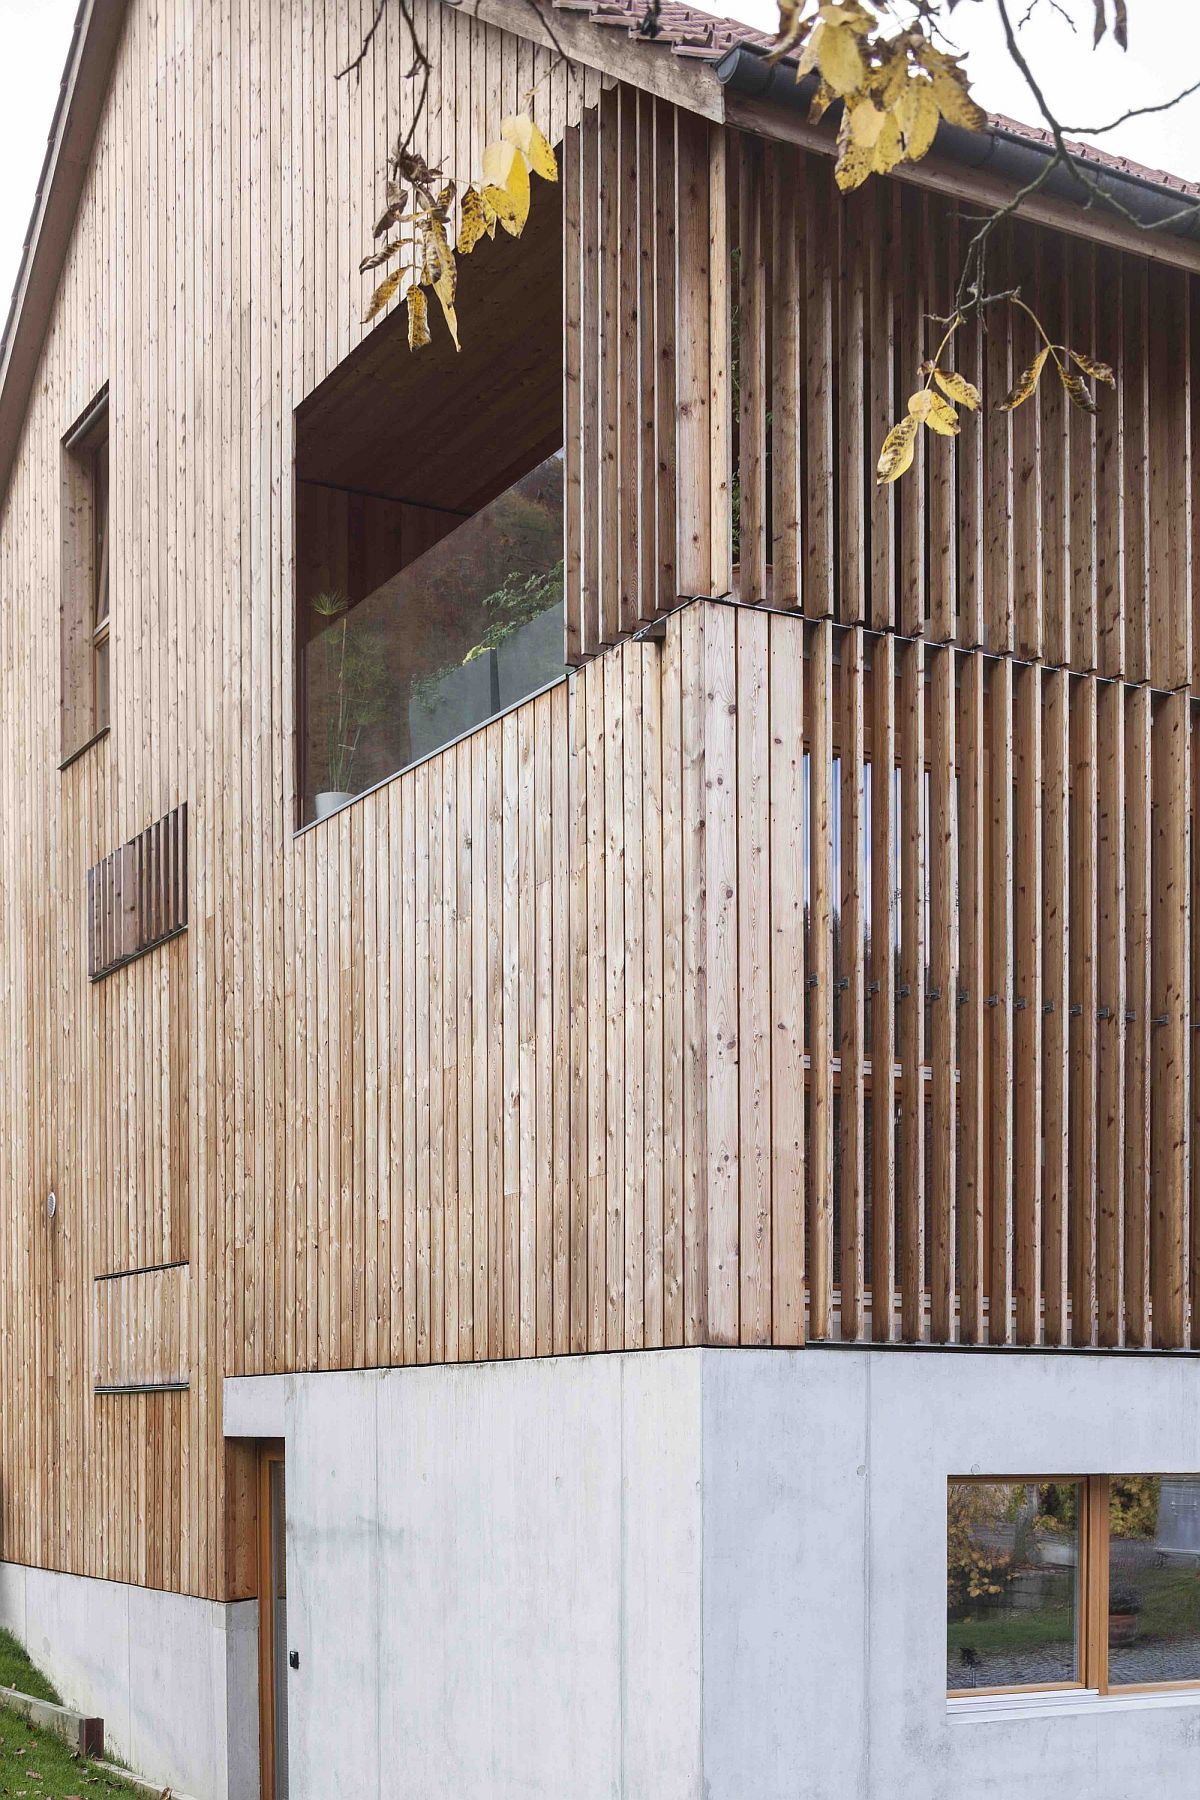 Wooden slats coupled with modern finishes revitalize old barn